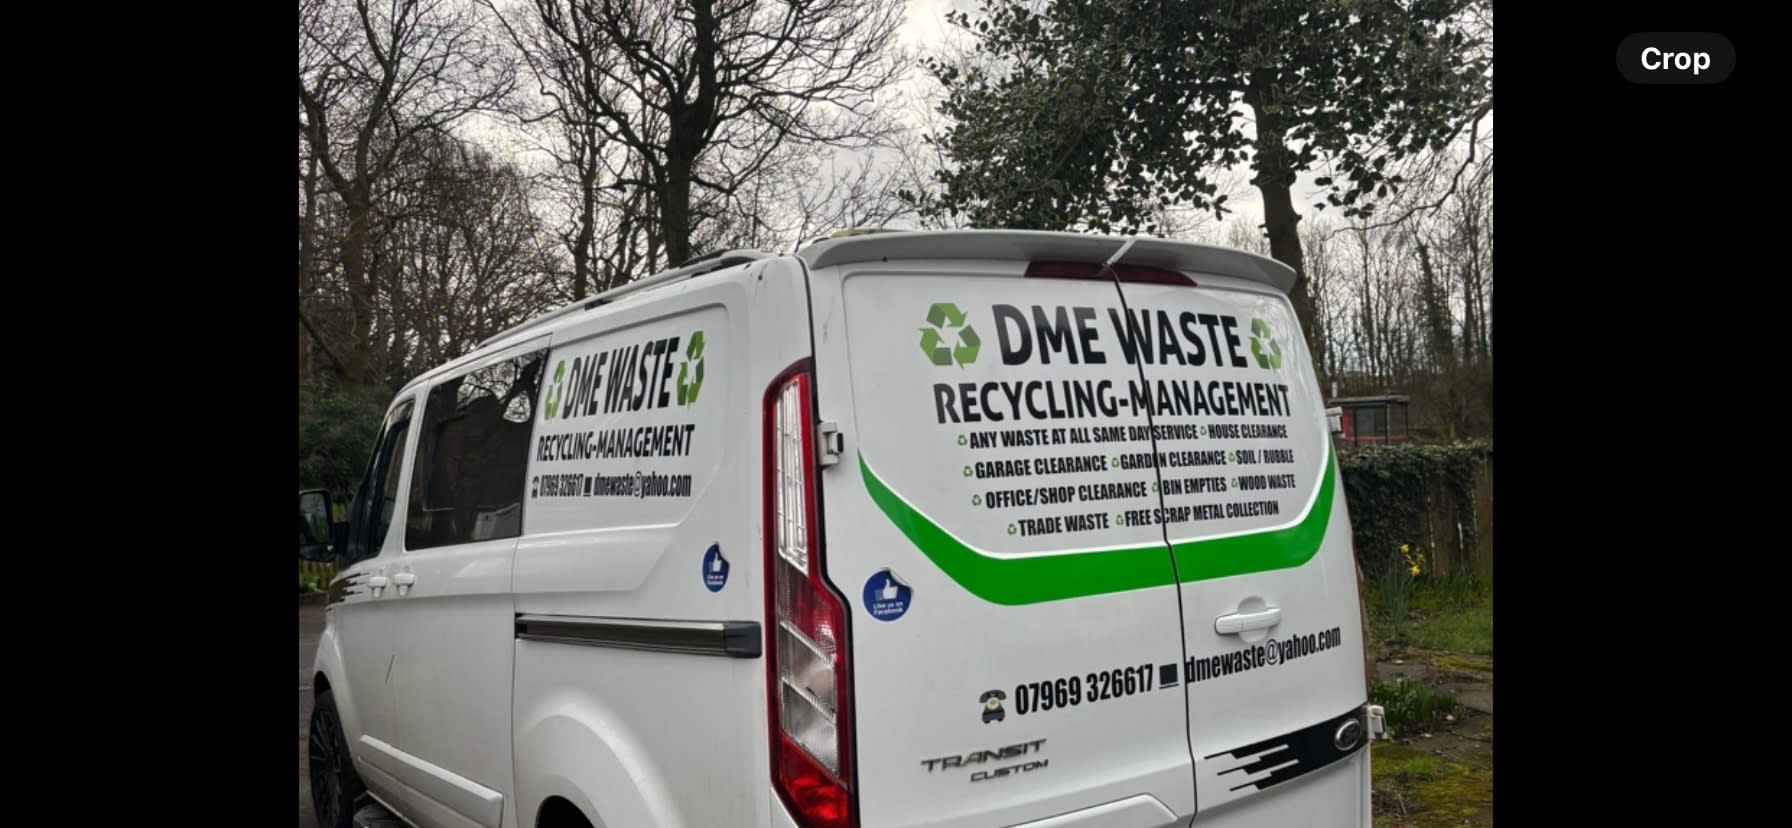 Images DME Waste Recycling Management